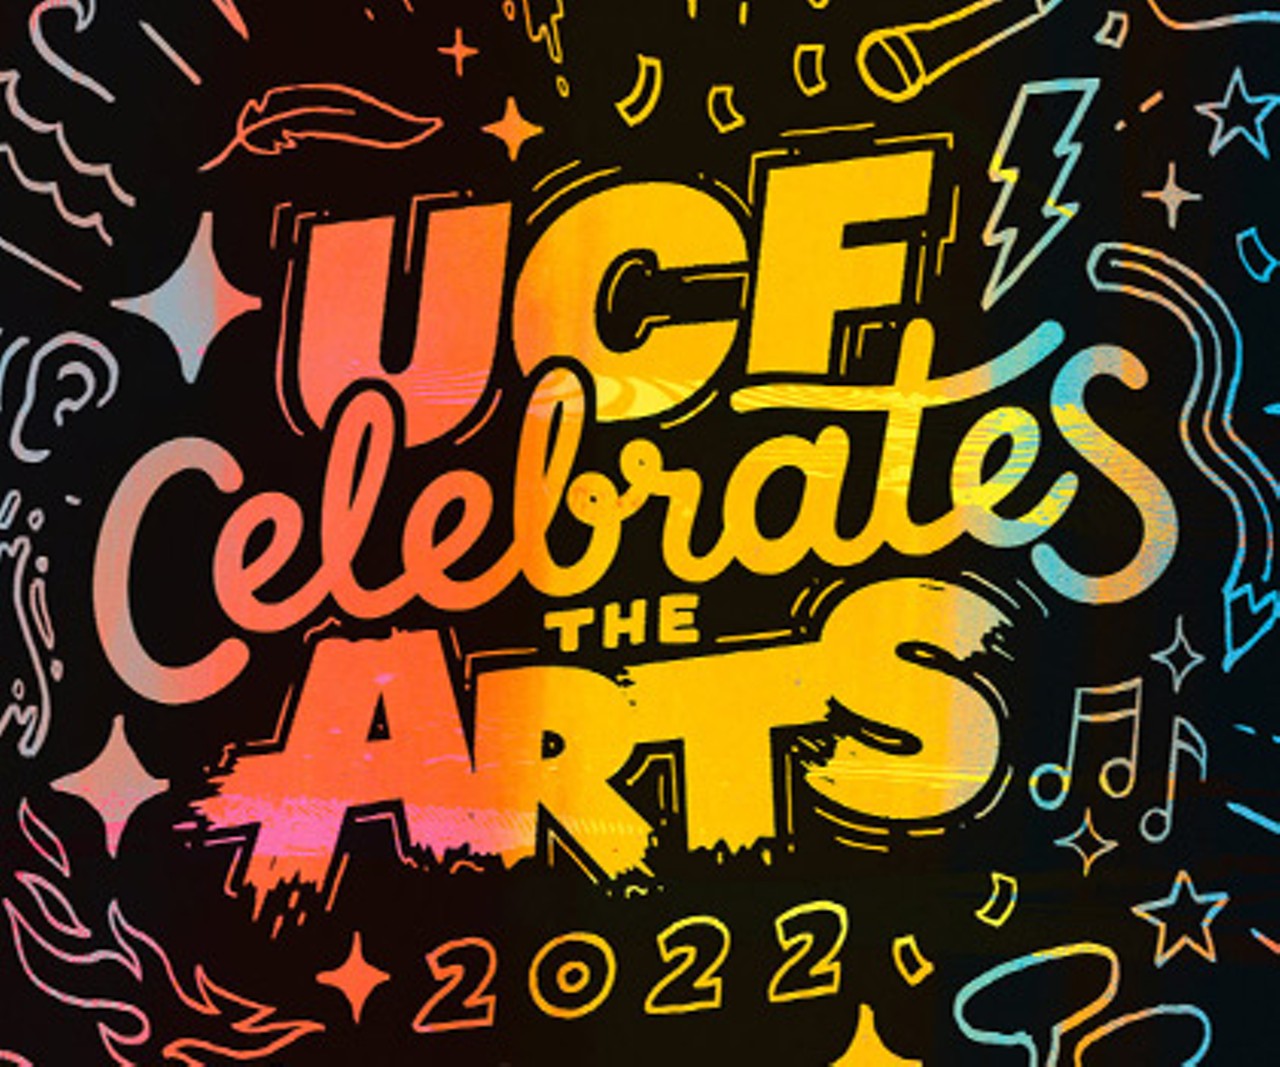 Ucf Calendar Summer 2022 Ucf Animation Showcase | Dr. Phillips Center For The Performing Arts | Film  | Orlando Weekly